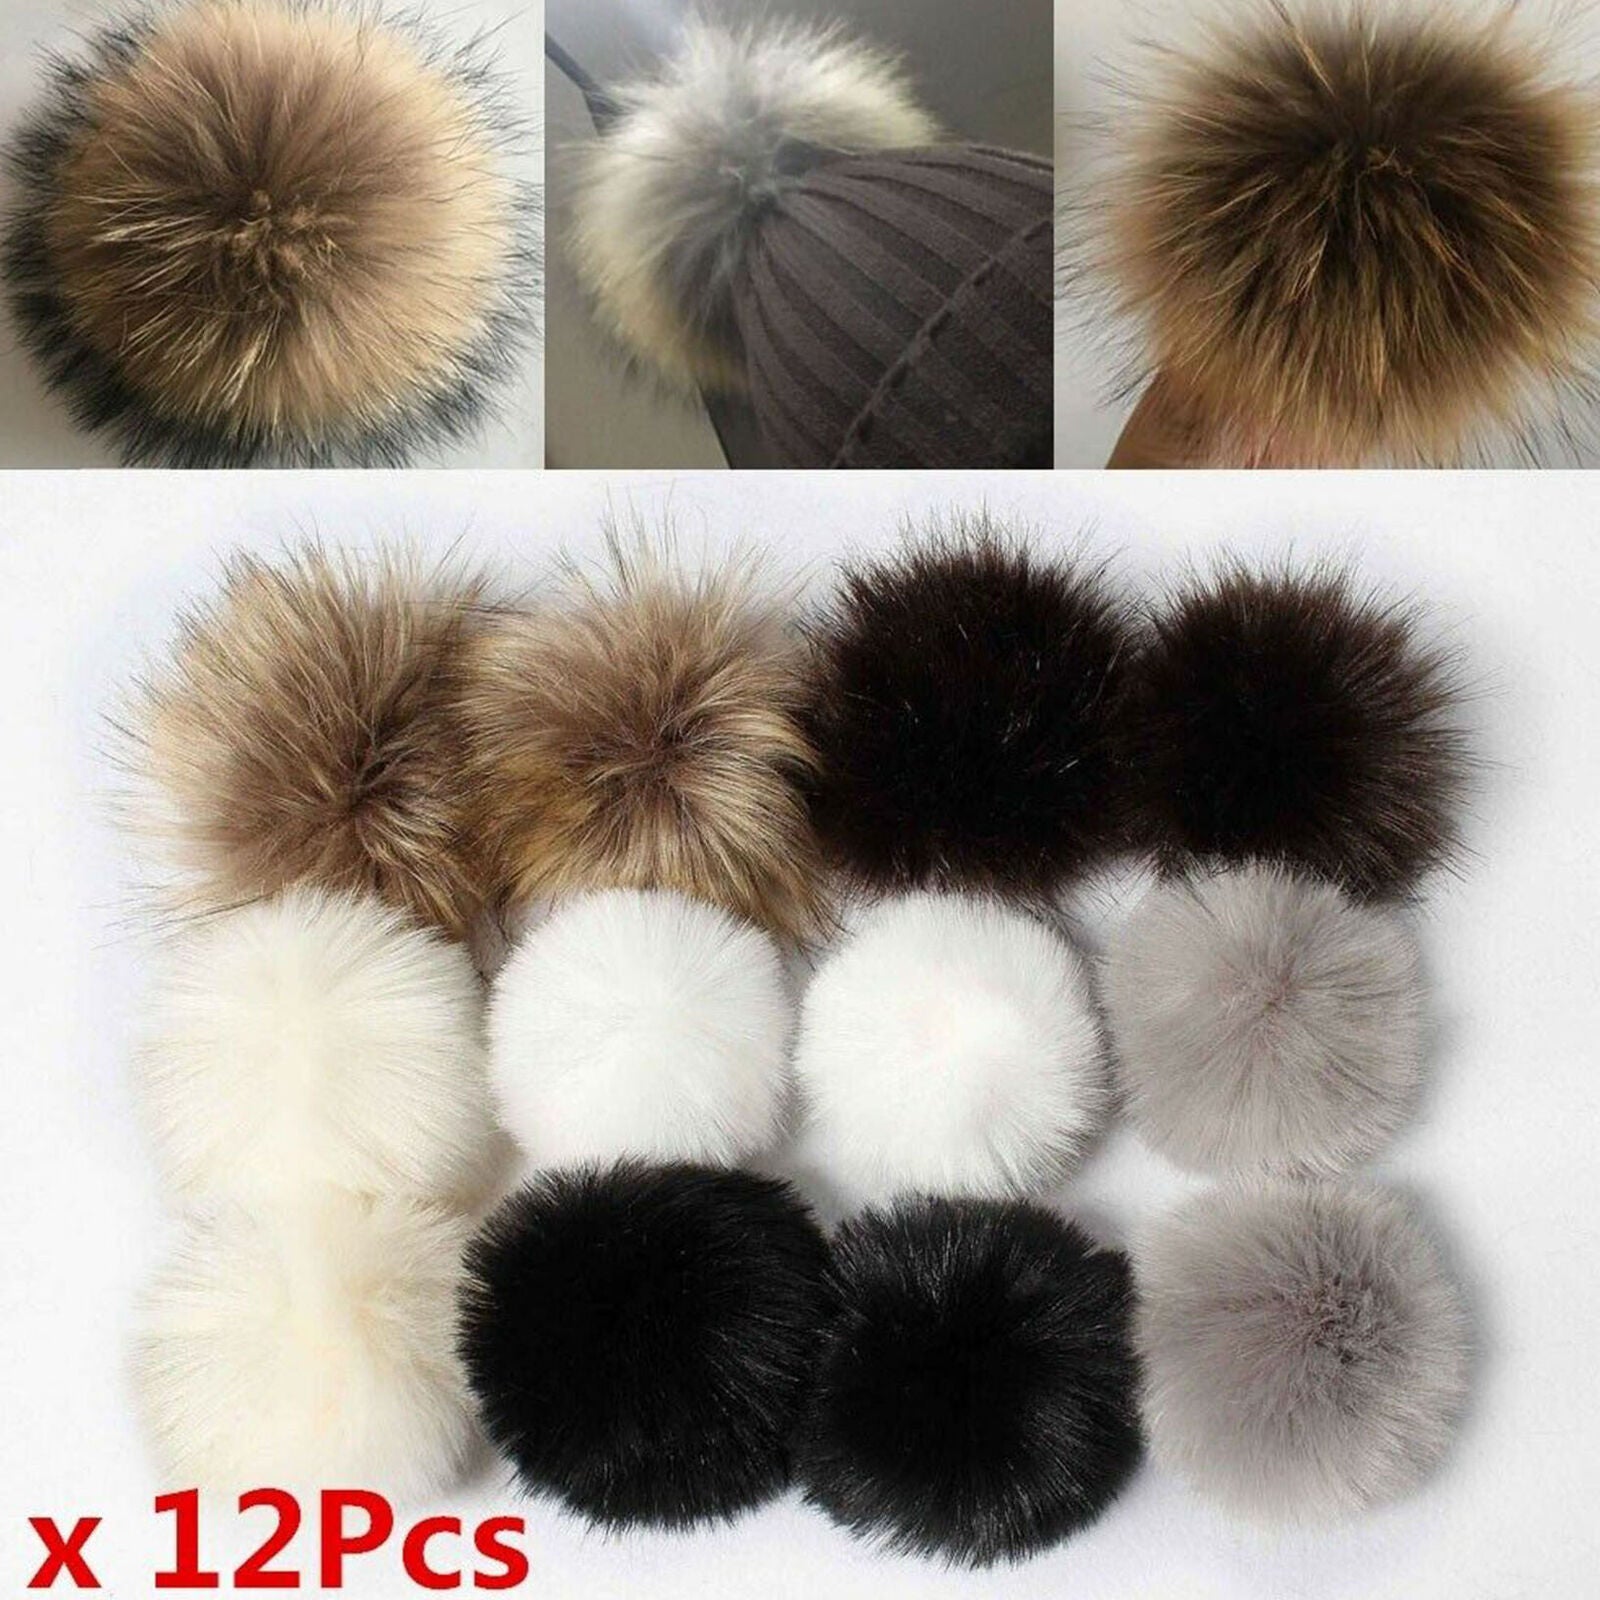 12Pcs/lot Faux Fur PomPom Ball For Hat Bags Keychain Fluffy Ball Pendant